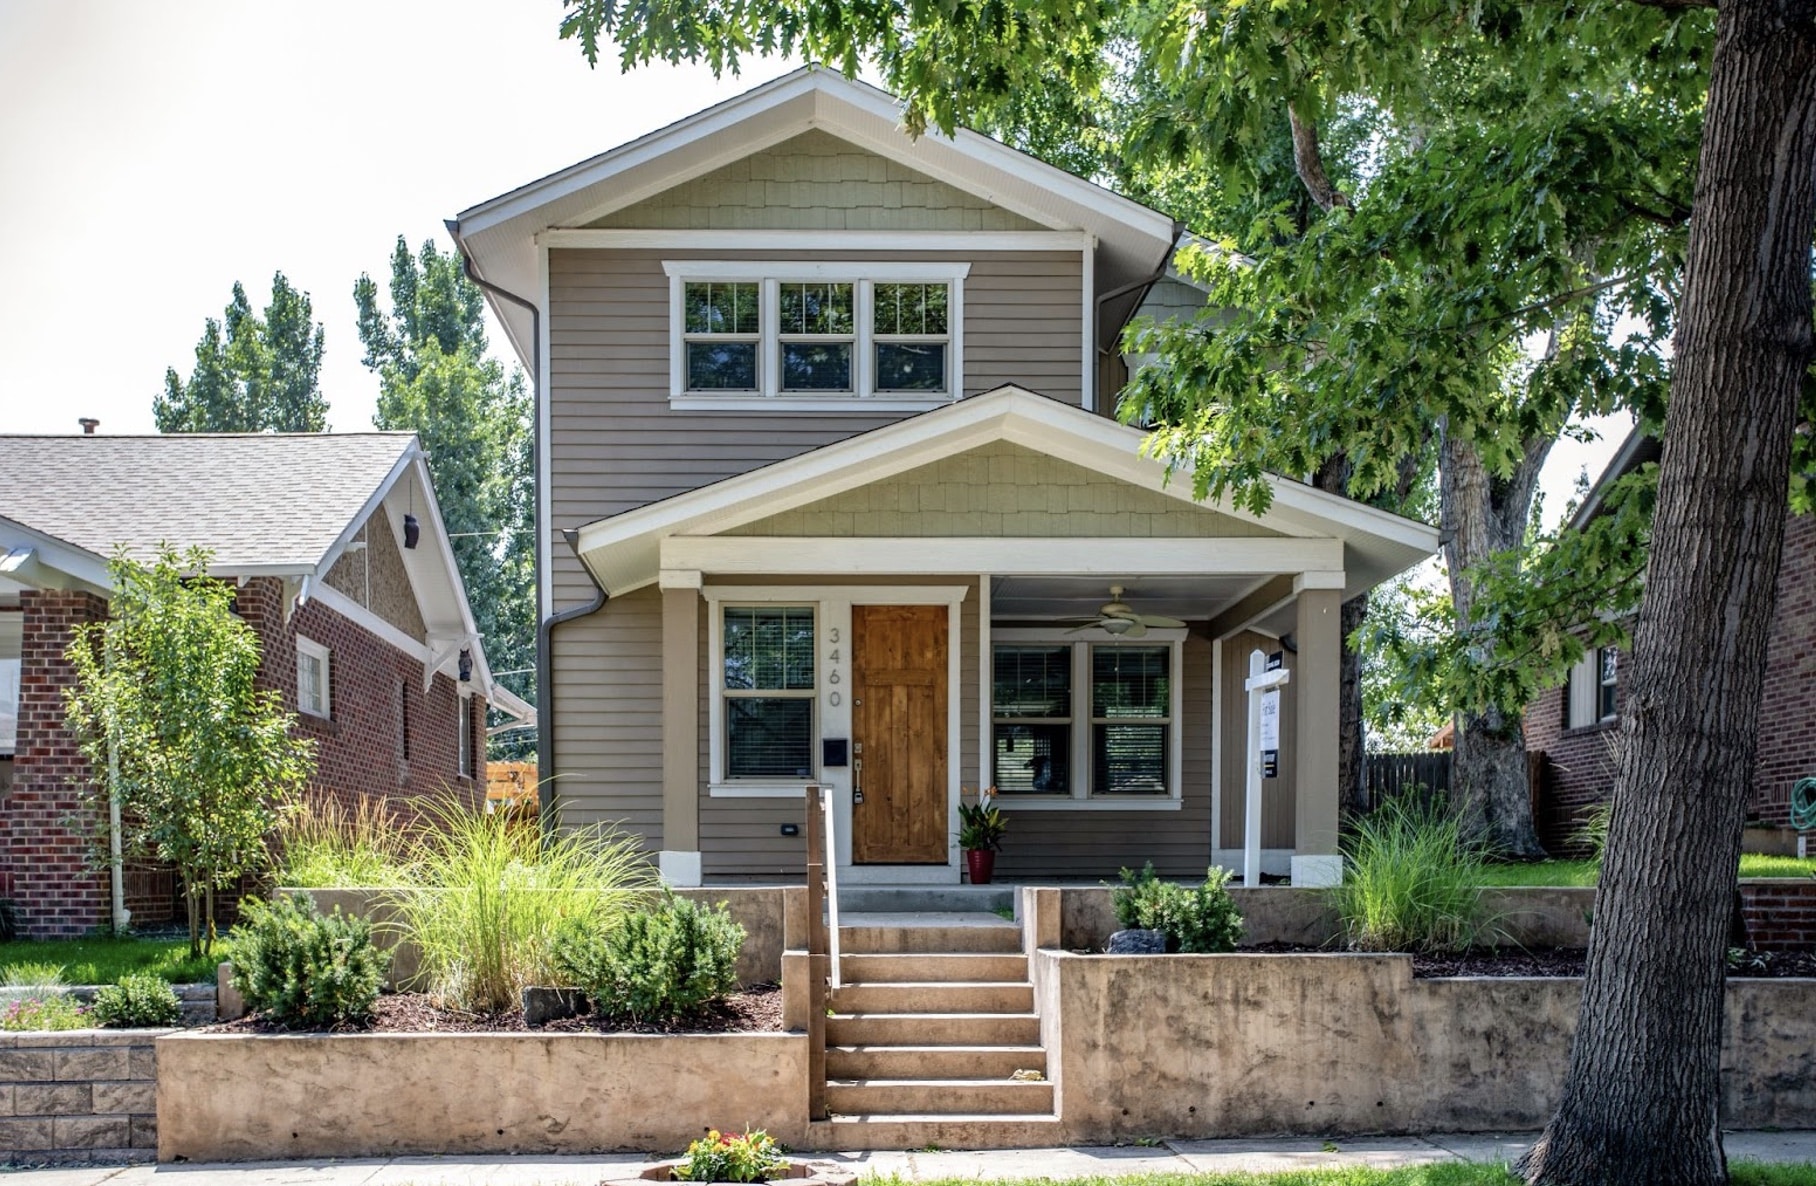 Look at homes that sold for $1 million in the Denver area